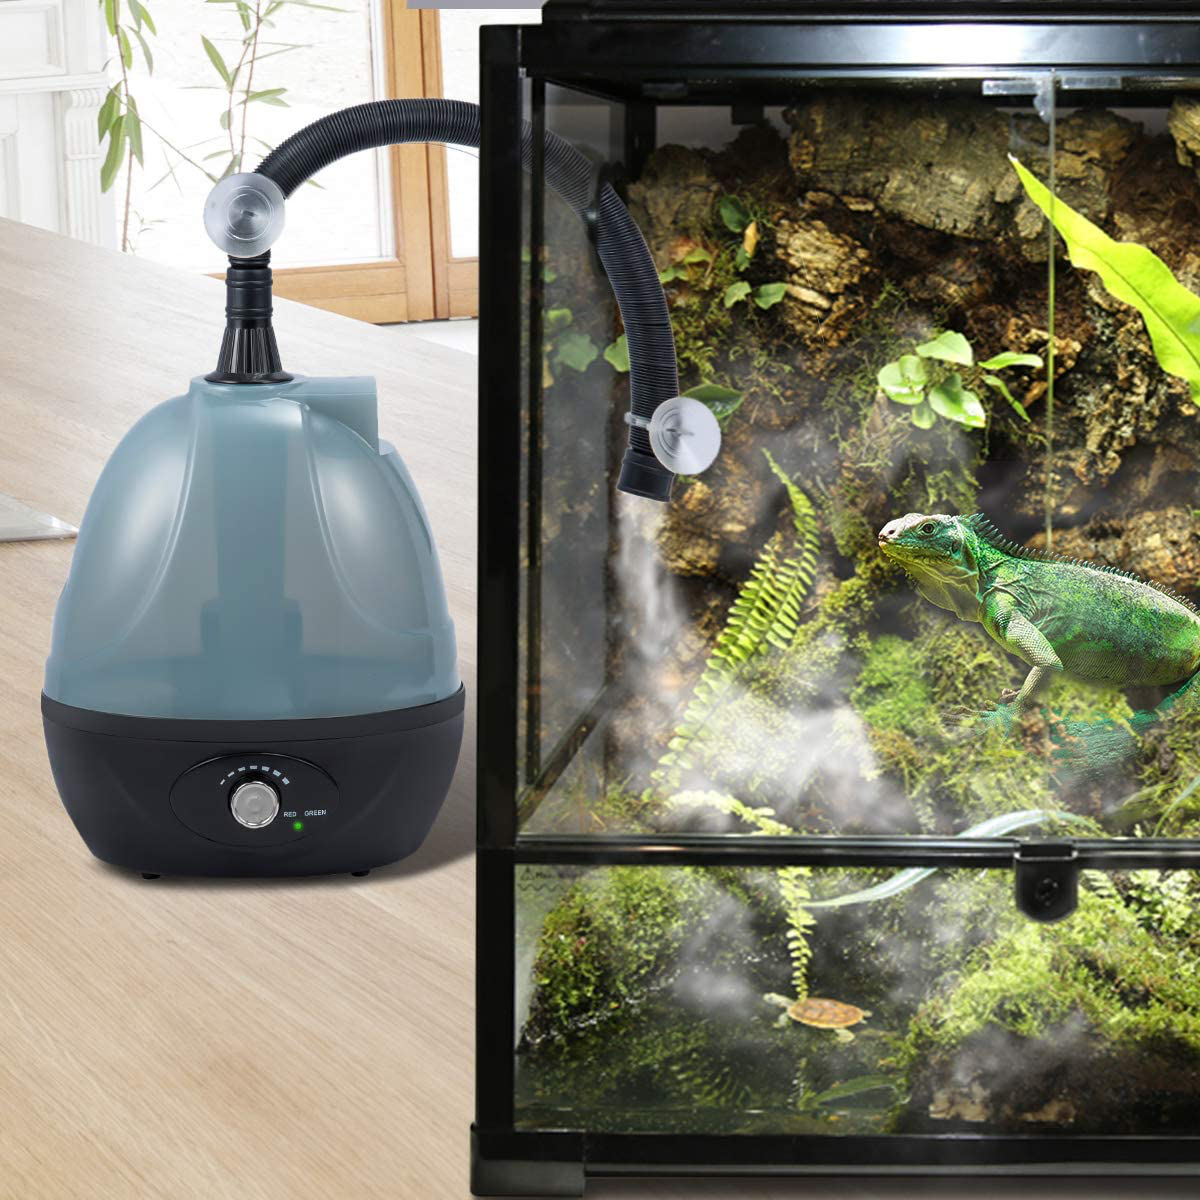 BETAZOOER Reptile Humidifiers Mister Fogger with Extension Tube/Hose, Suitable for Reptiles/Amphibians/Herps/Vivarium with Terrariums and Enclosures (2.5 Liter Tank) Animals & Pet Supplies > Pet Supplies > Reptile & Amphibian Supplies > Reptile & Amphibian Substrates BETAZOOER   